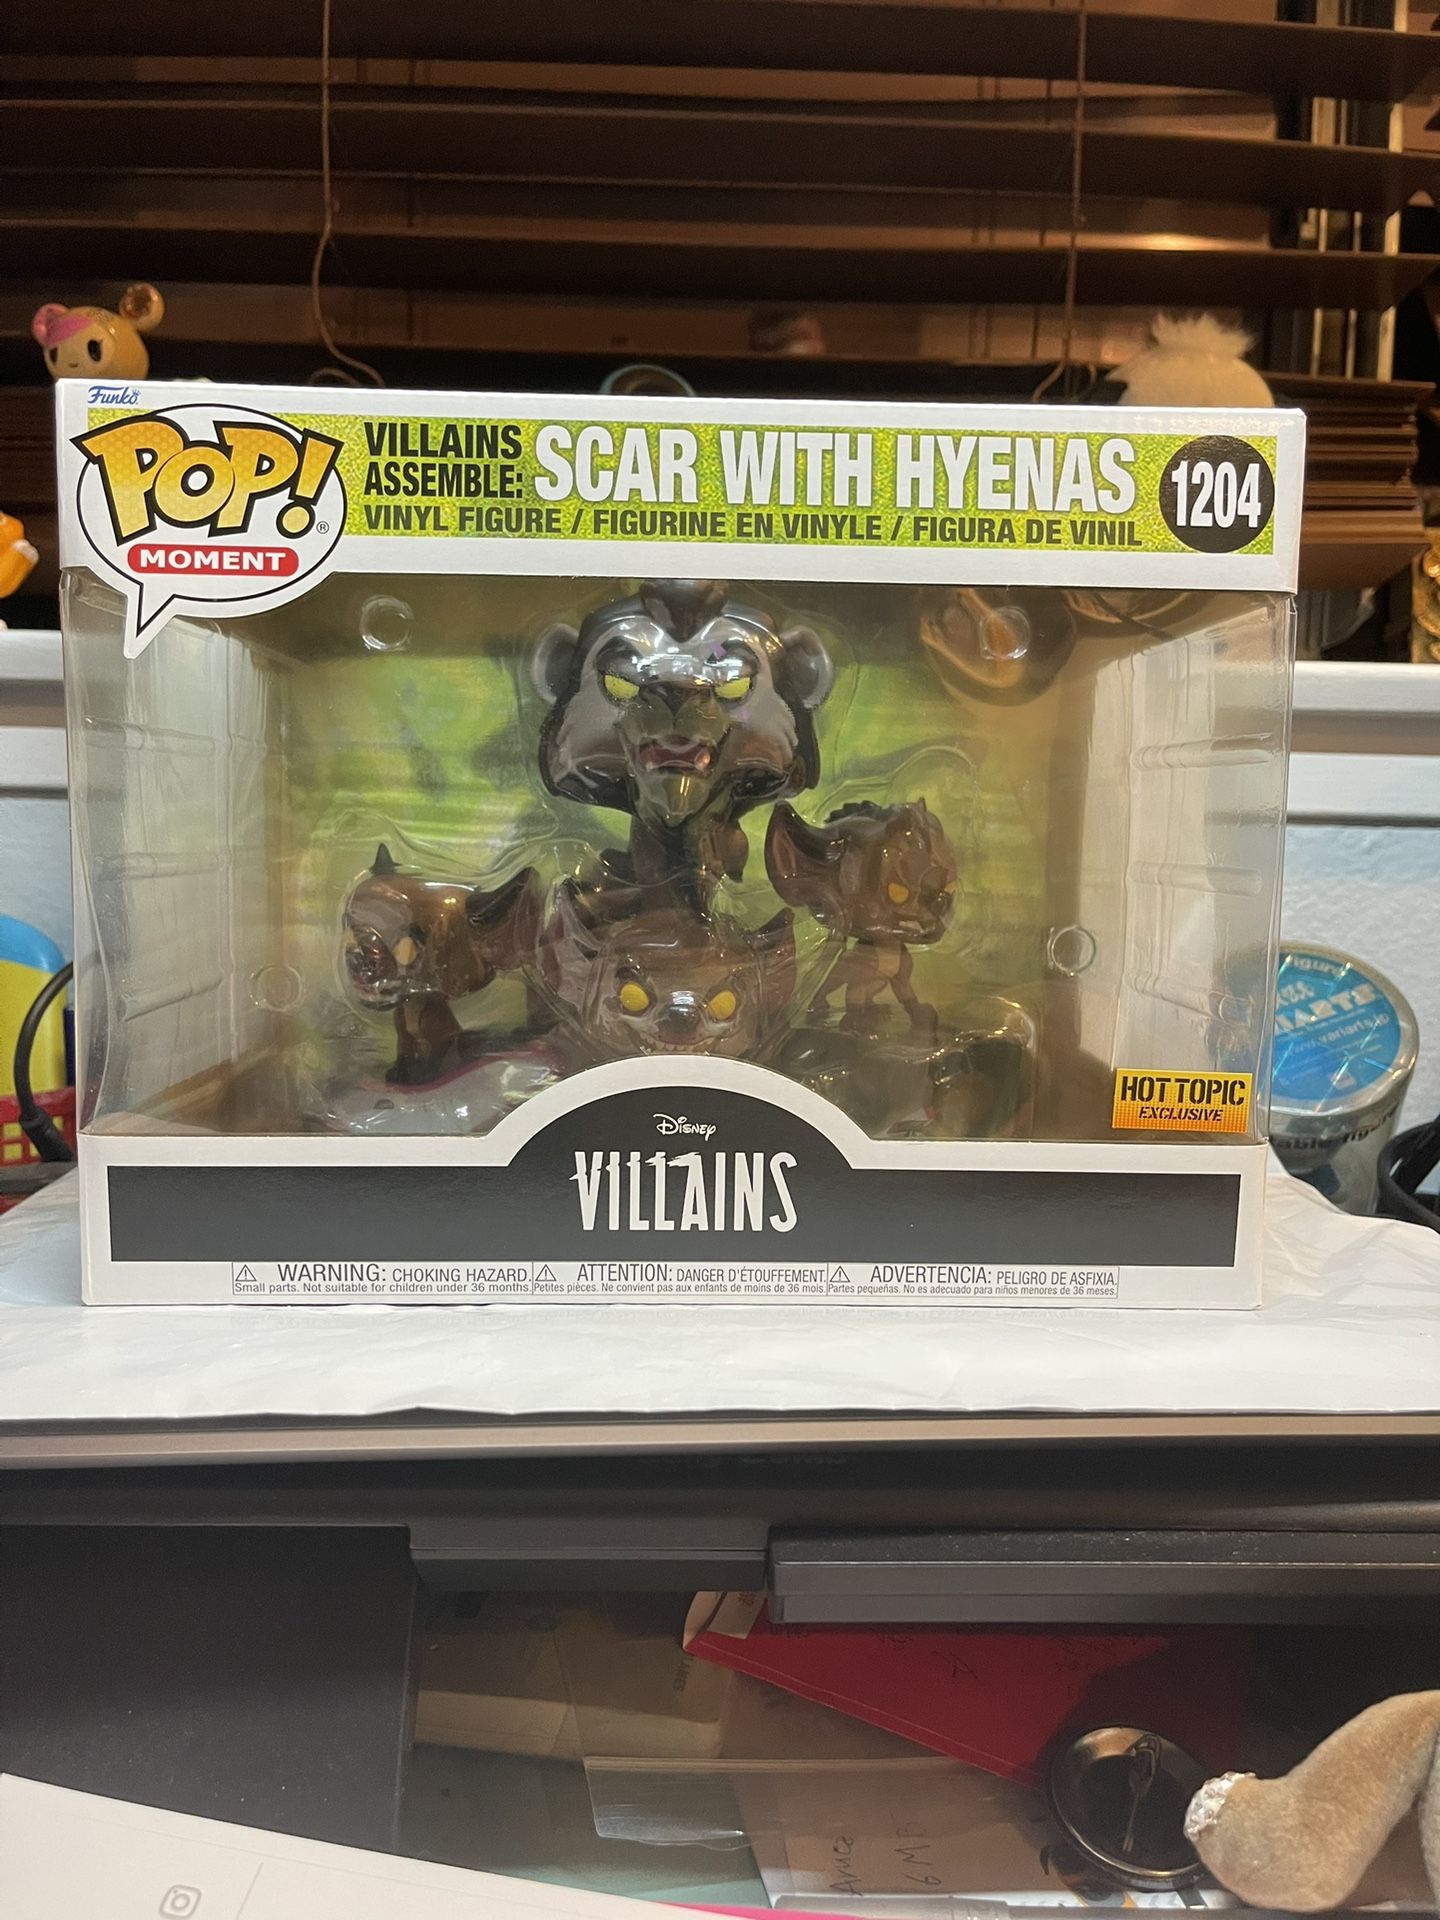 Funko POP Disney Villains Lion King SCAR WITH HYENAS #1204 Hot Topic Exclusive for Sale in West Covina, CA OfferUp